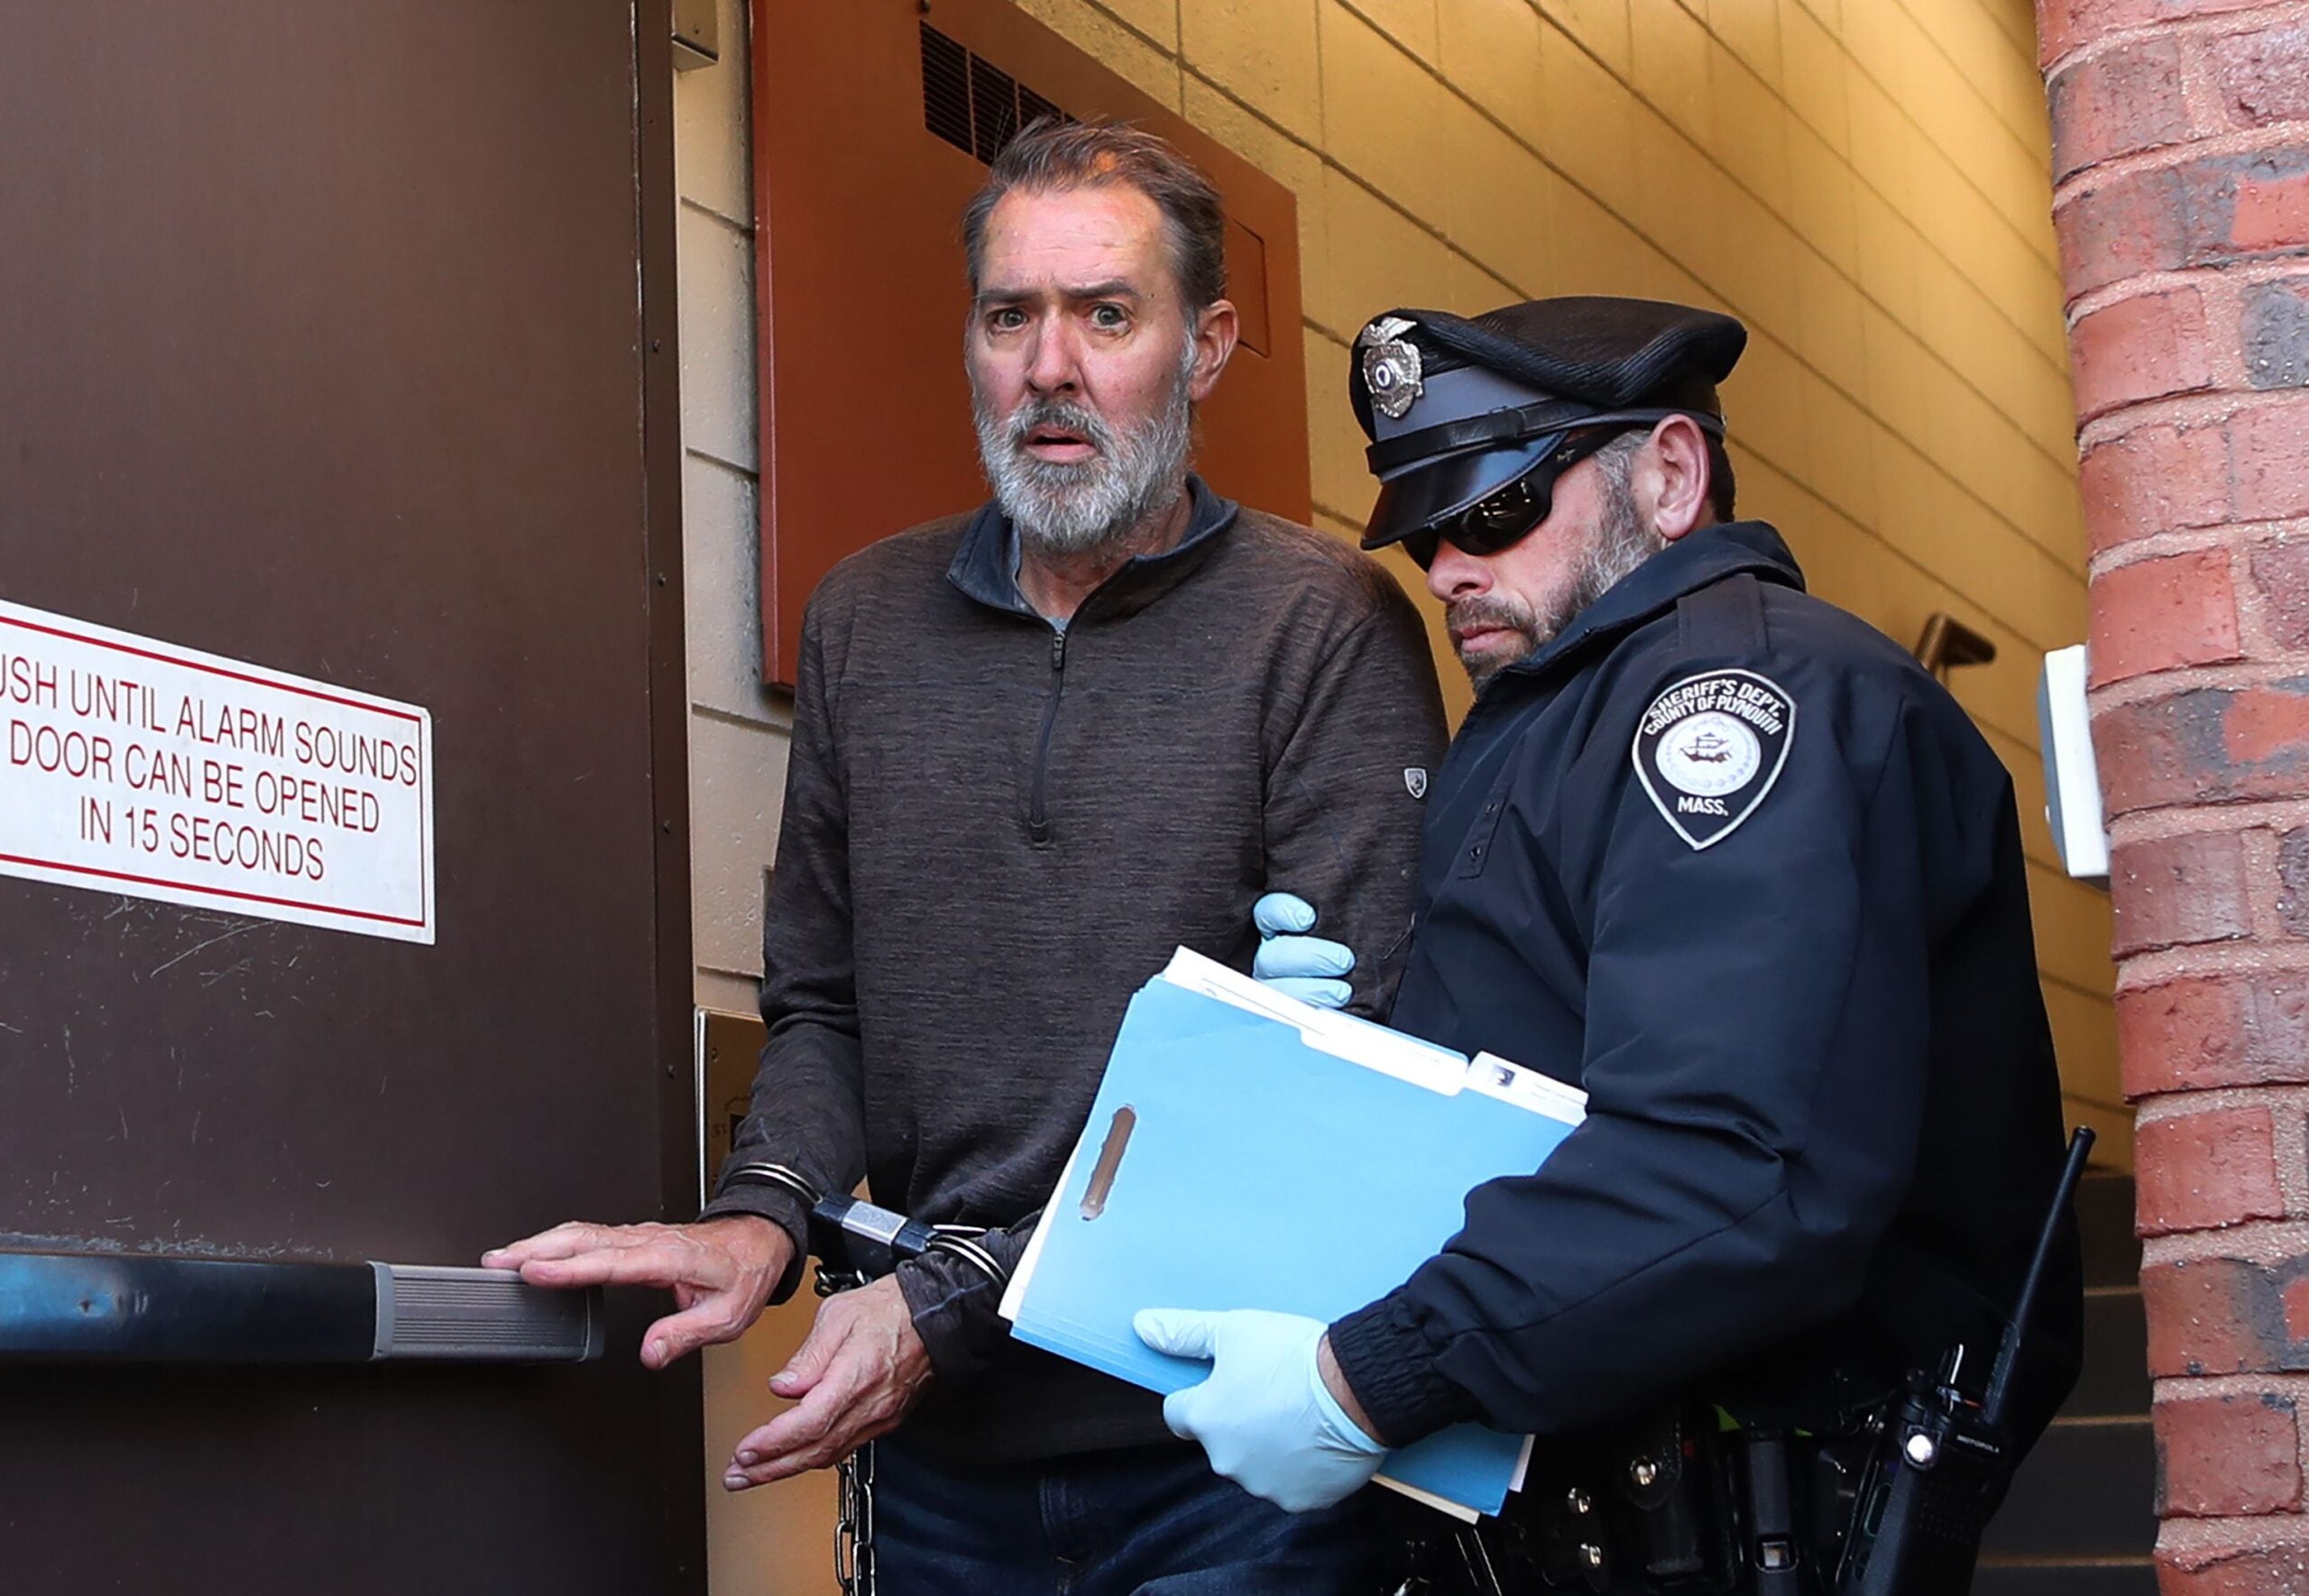 Bradley Rein, 53, of Hingham, is led out of Hingham District Court on Nov. 22, 2022 after his arraignment for crashing his SUV into the Hingham Apple store.